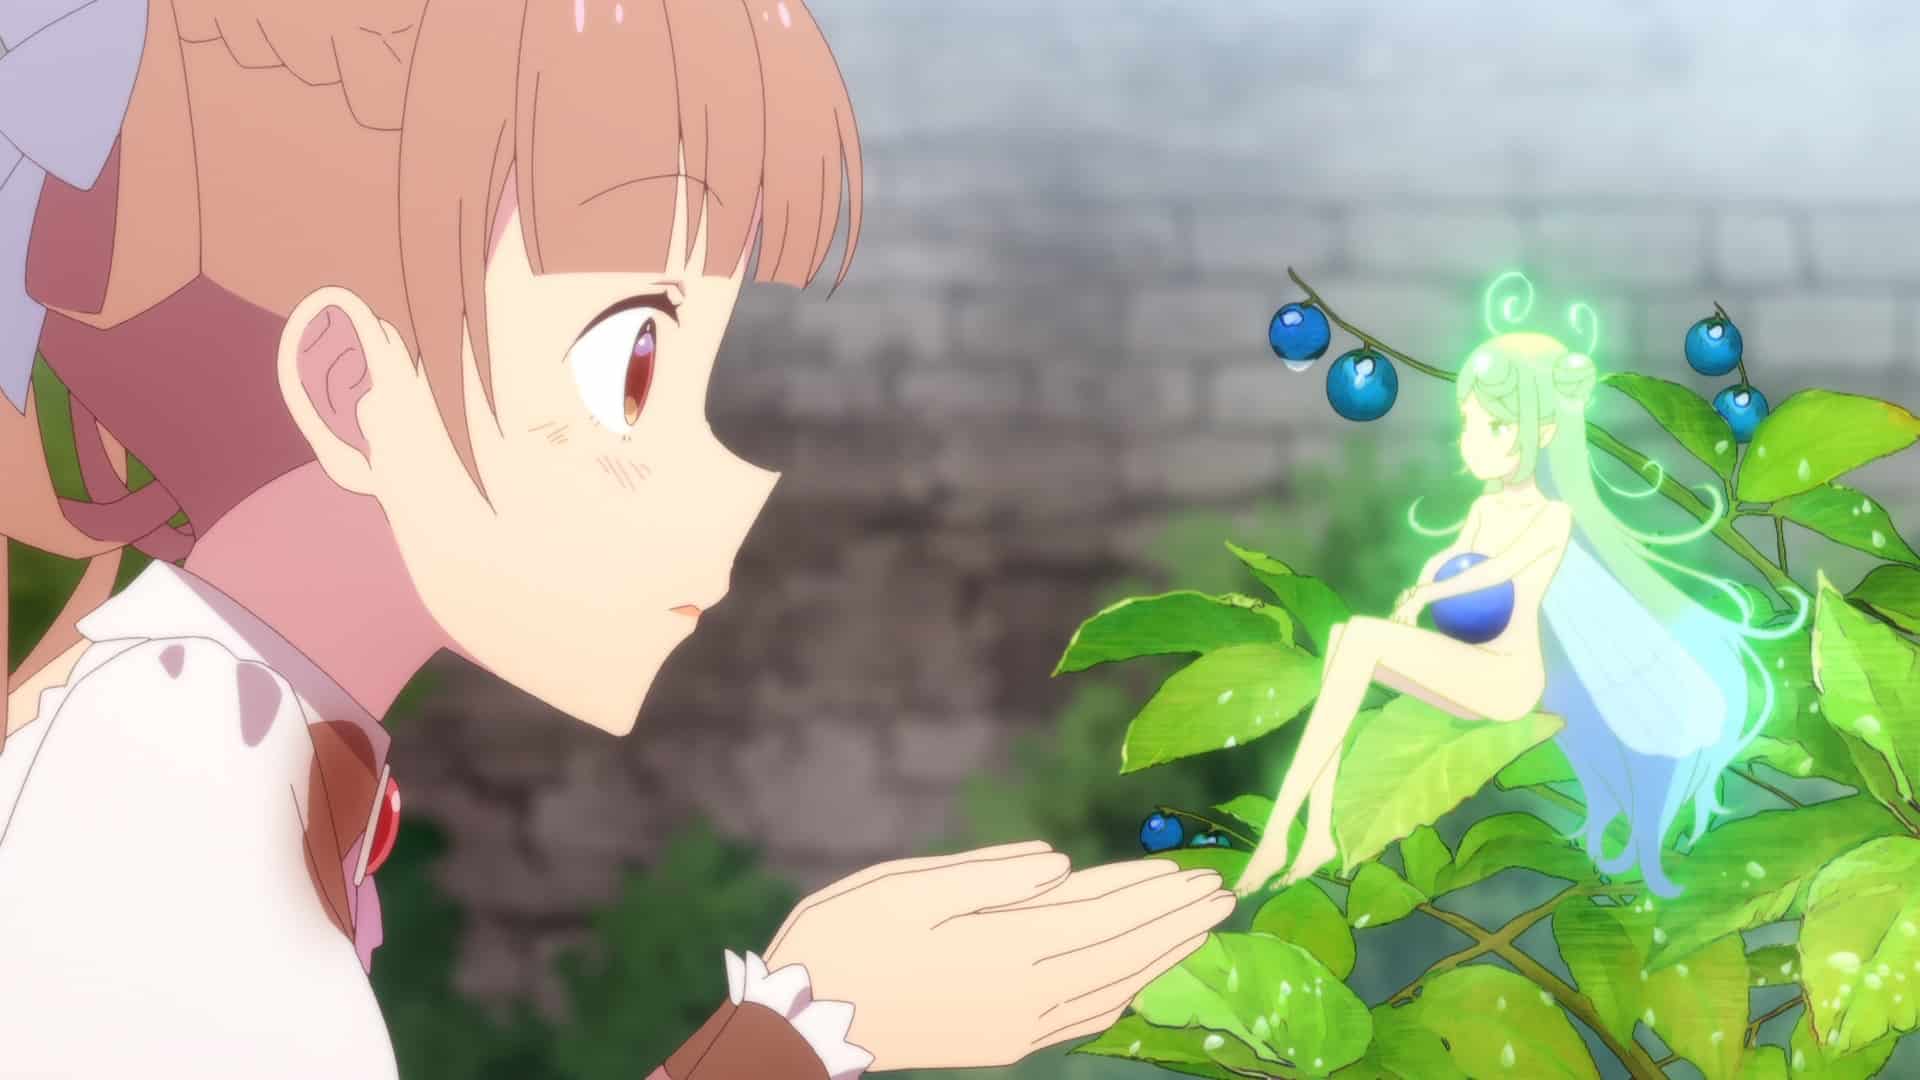 Sugar Apple Fairy Tale Episode 5: Release Date, Spoilers & Where To Watch